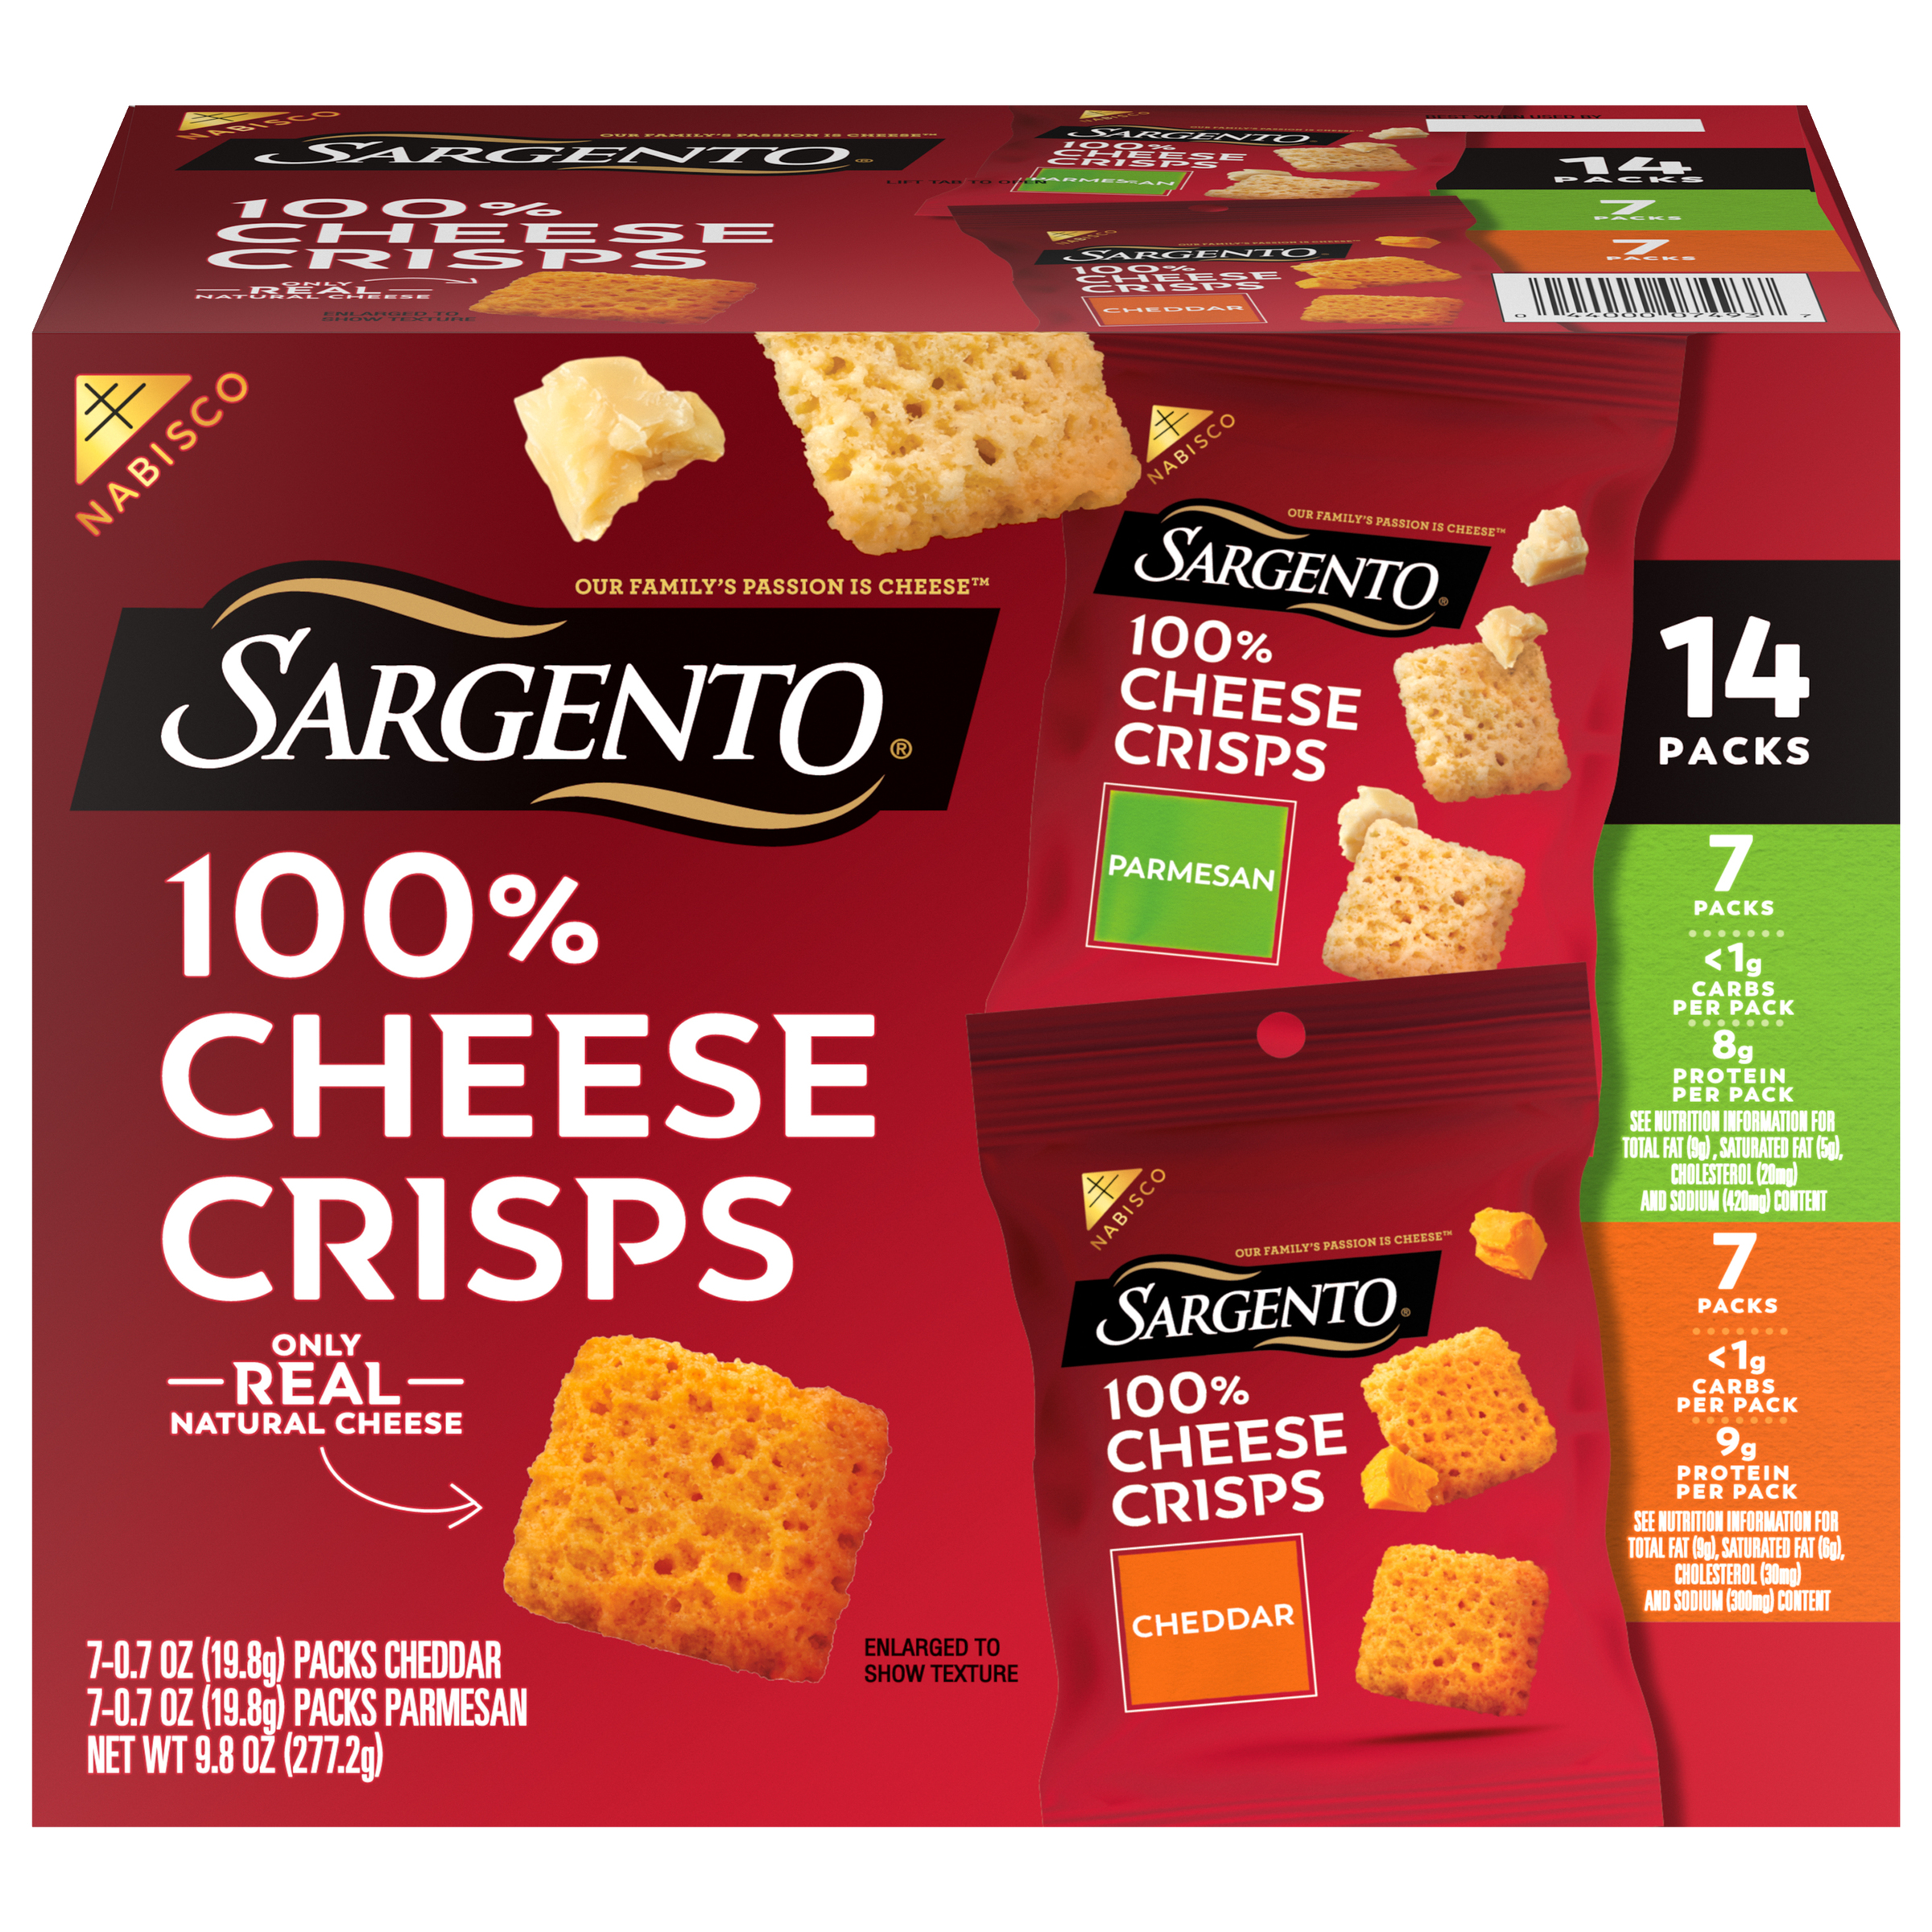 SARGENTO® 100% Cheese Crisps Variety Pack, Parmesan and Cheddar, 14 Snack Packs-0